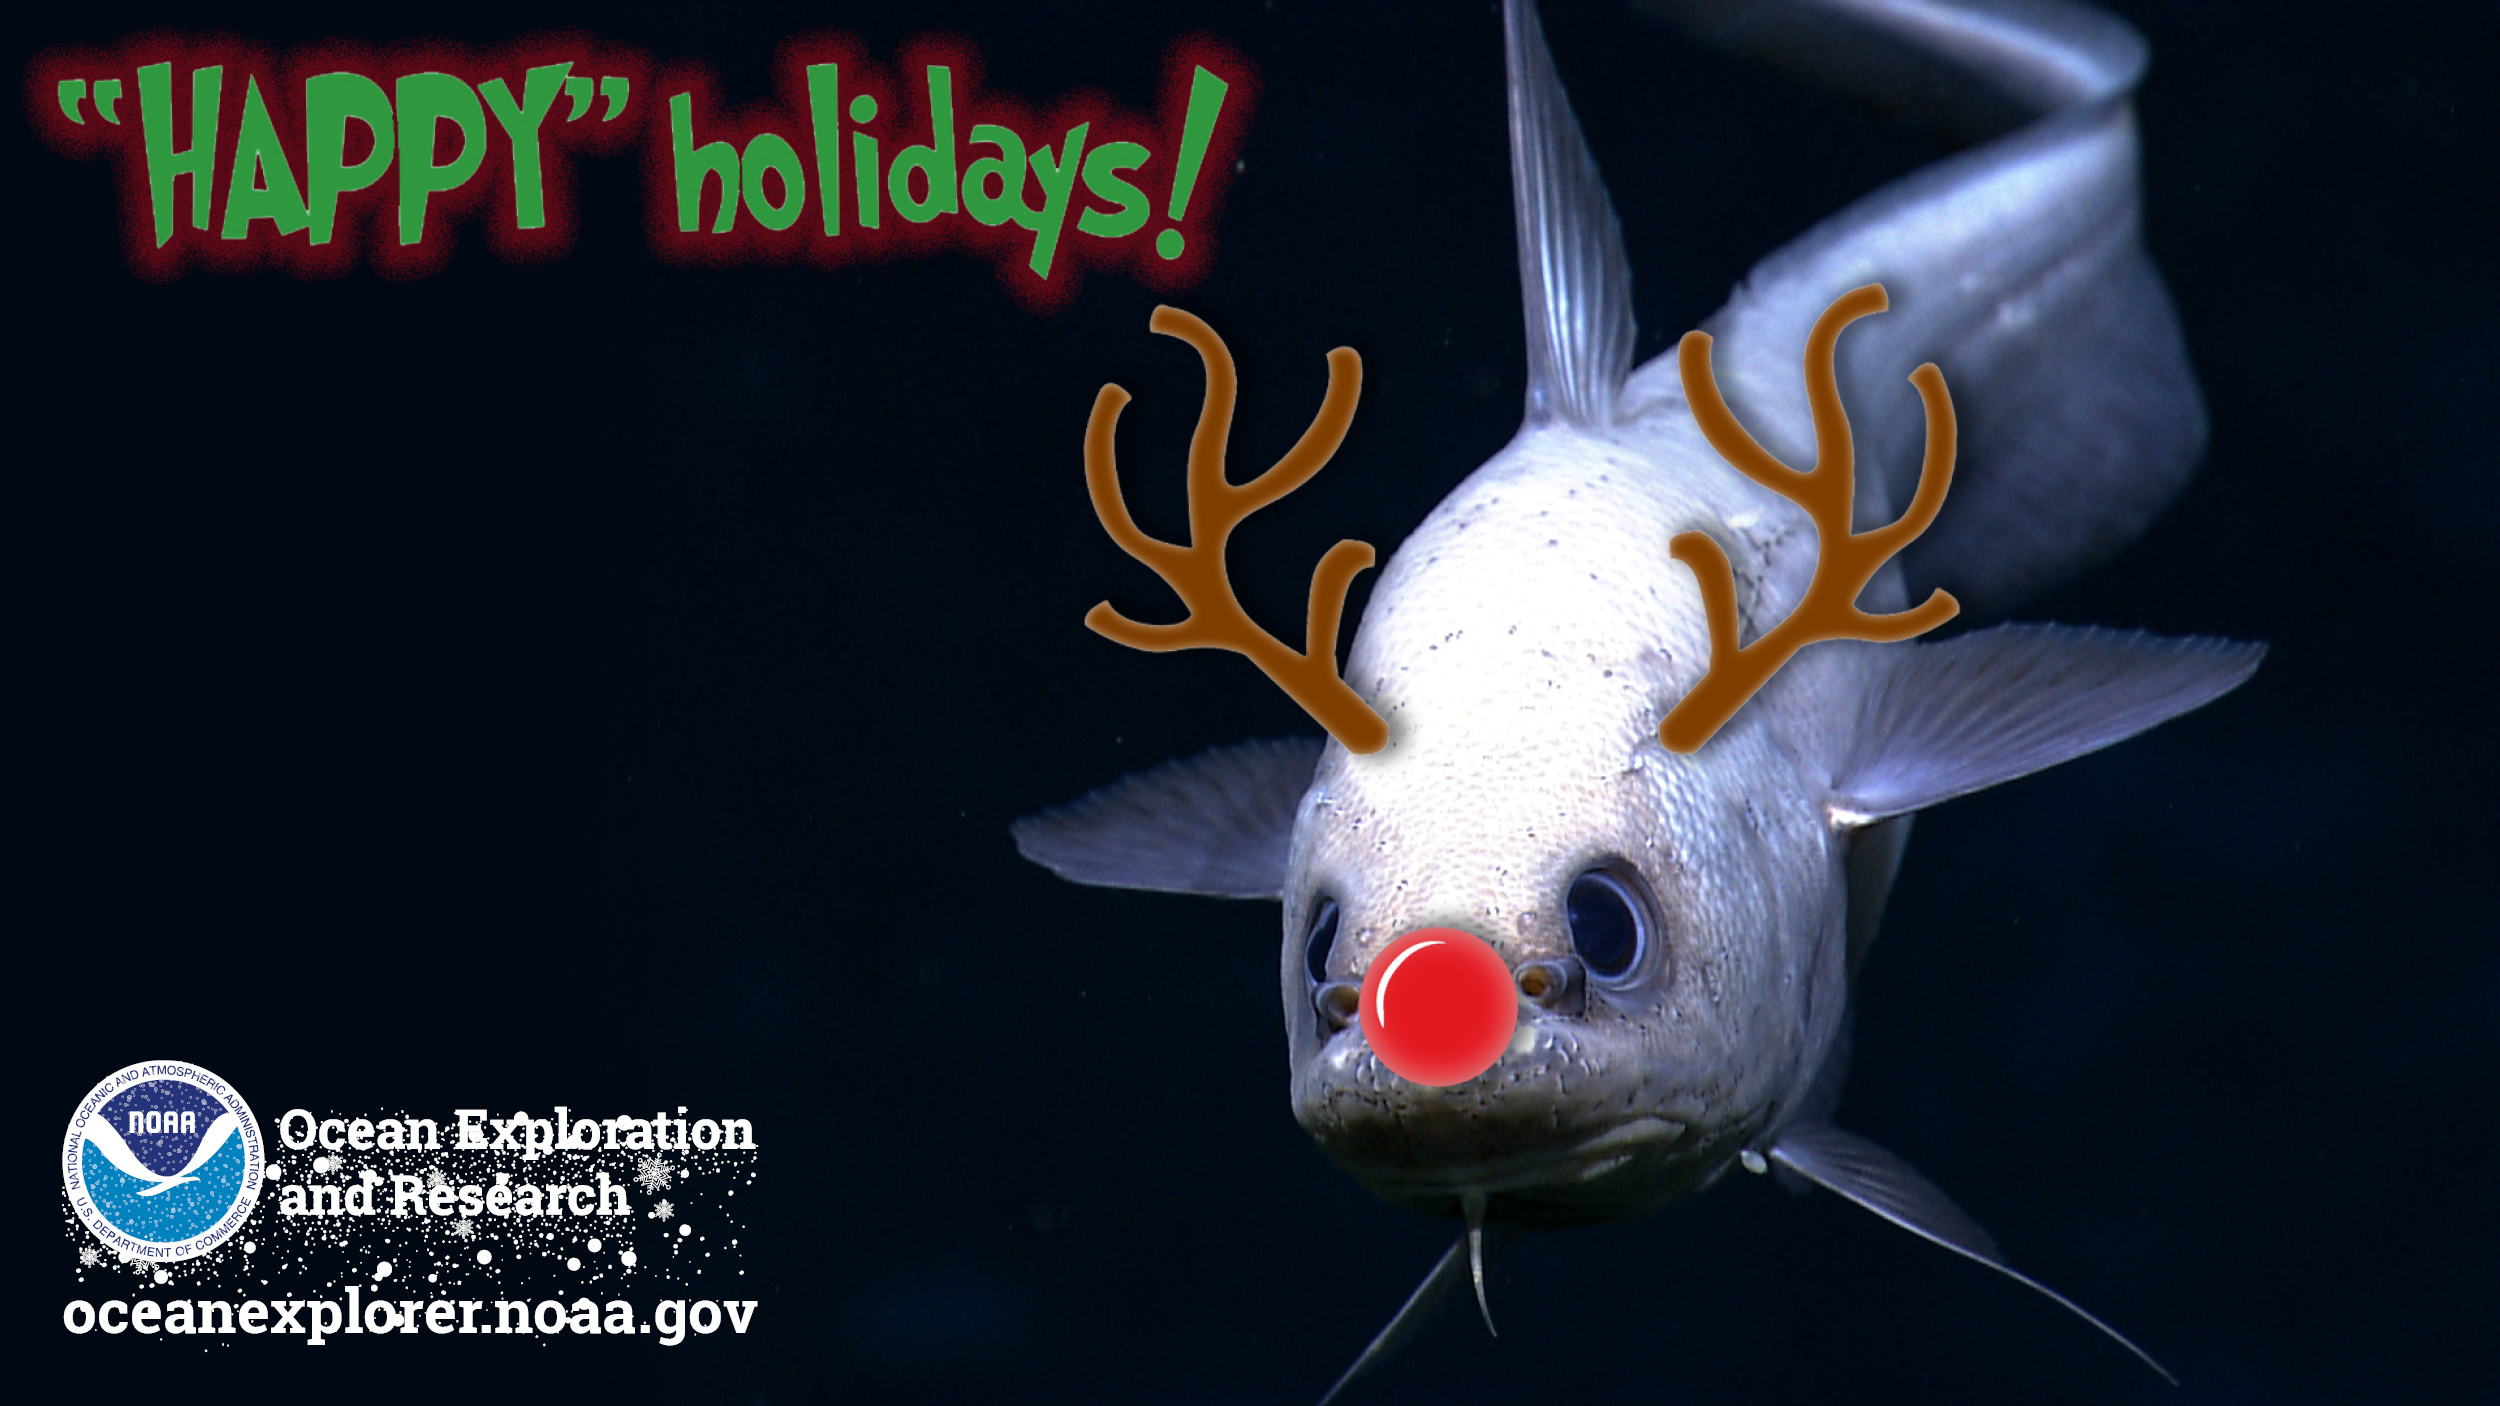 2023 NOAA Education holiday card: Buoy  National Oceanic and Atmospheric  Administration